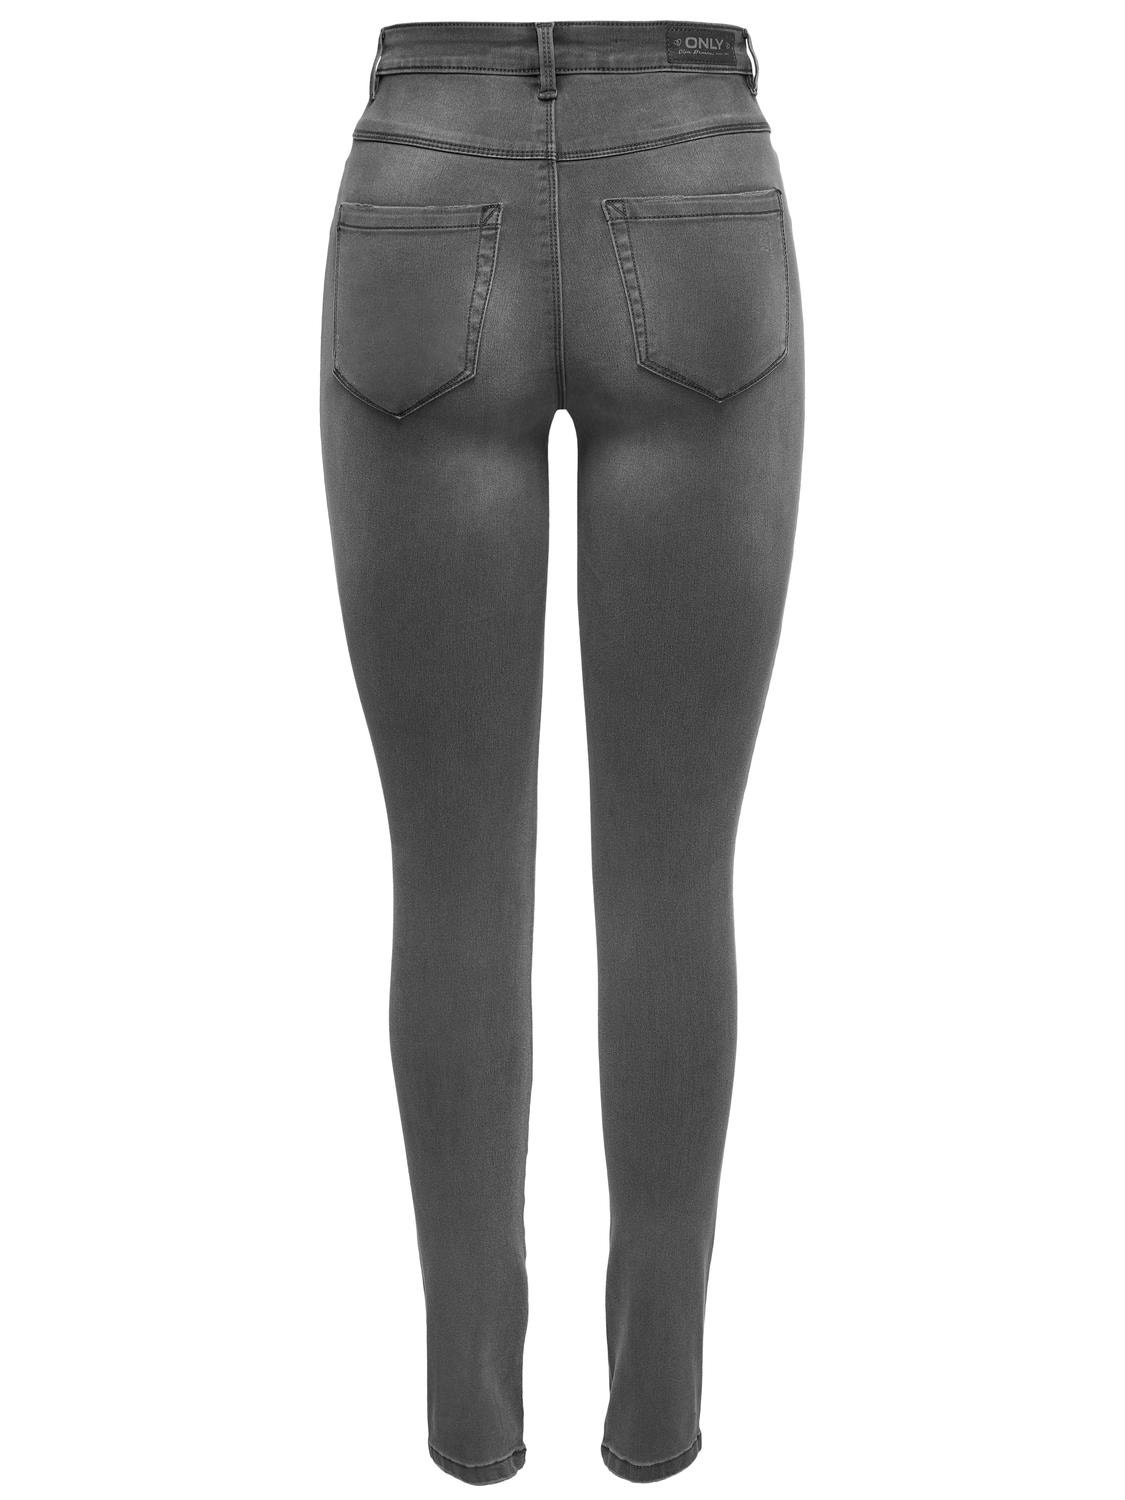 ONLY Skinny Fit Hohe Taille Jeans -Dark Grey Denim - 15159647